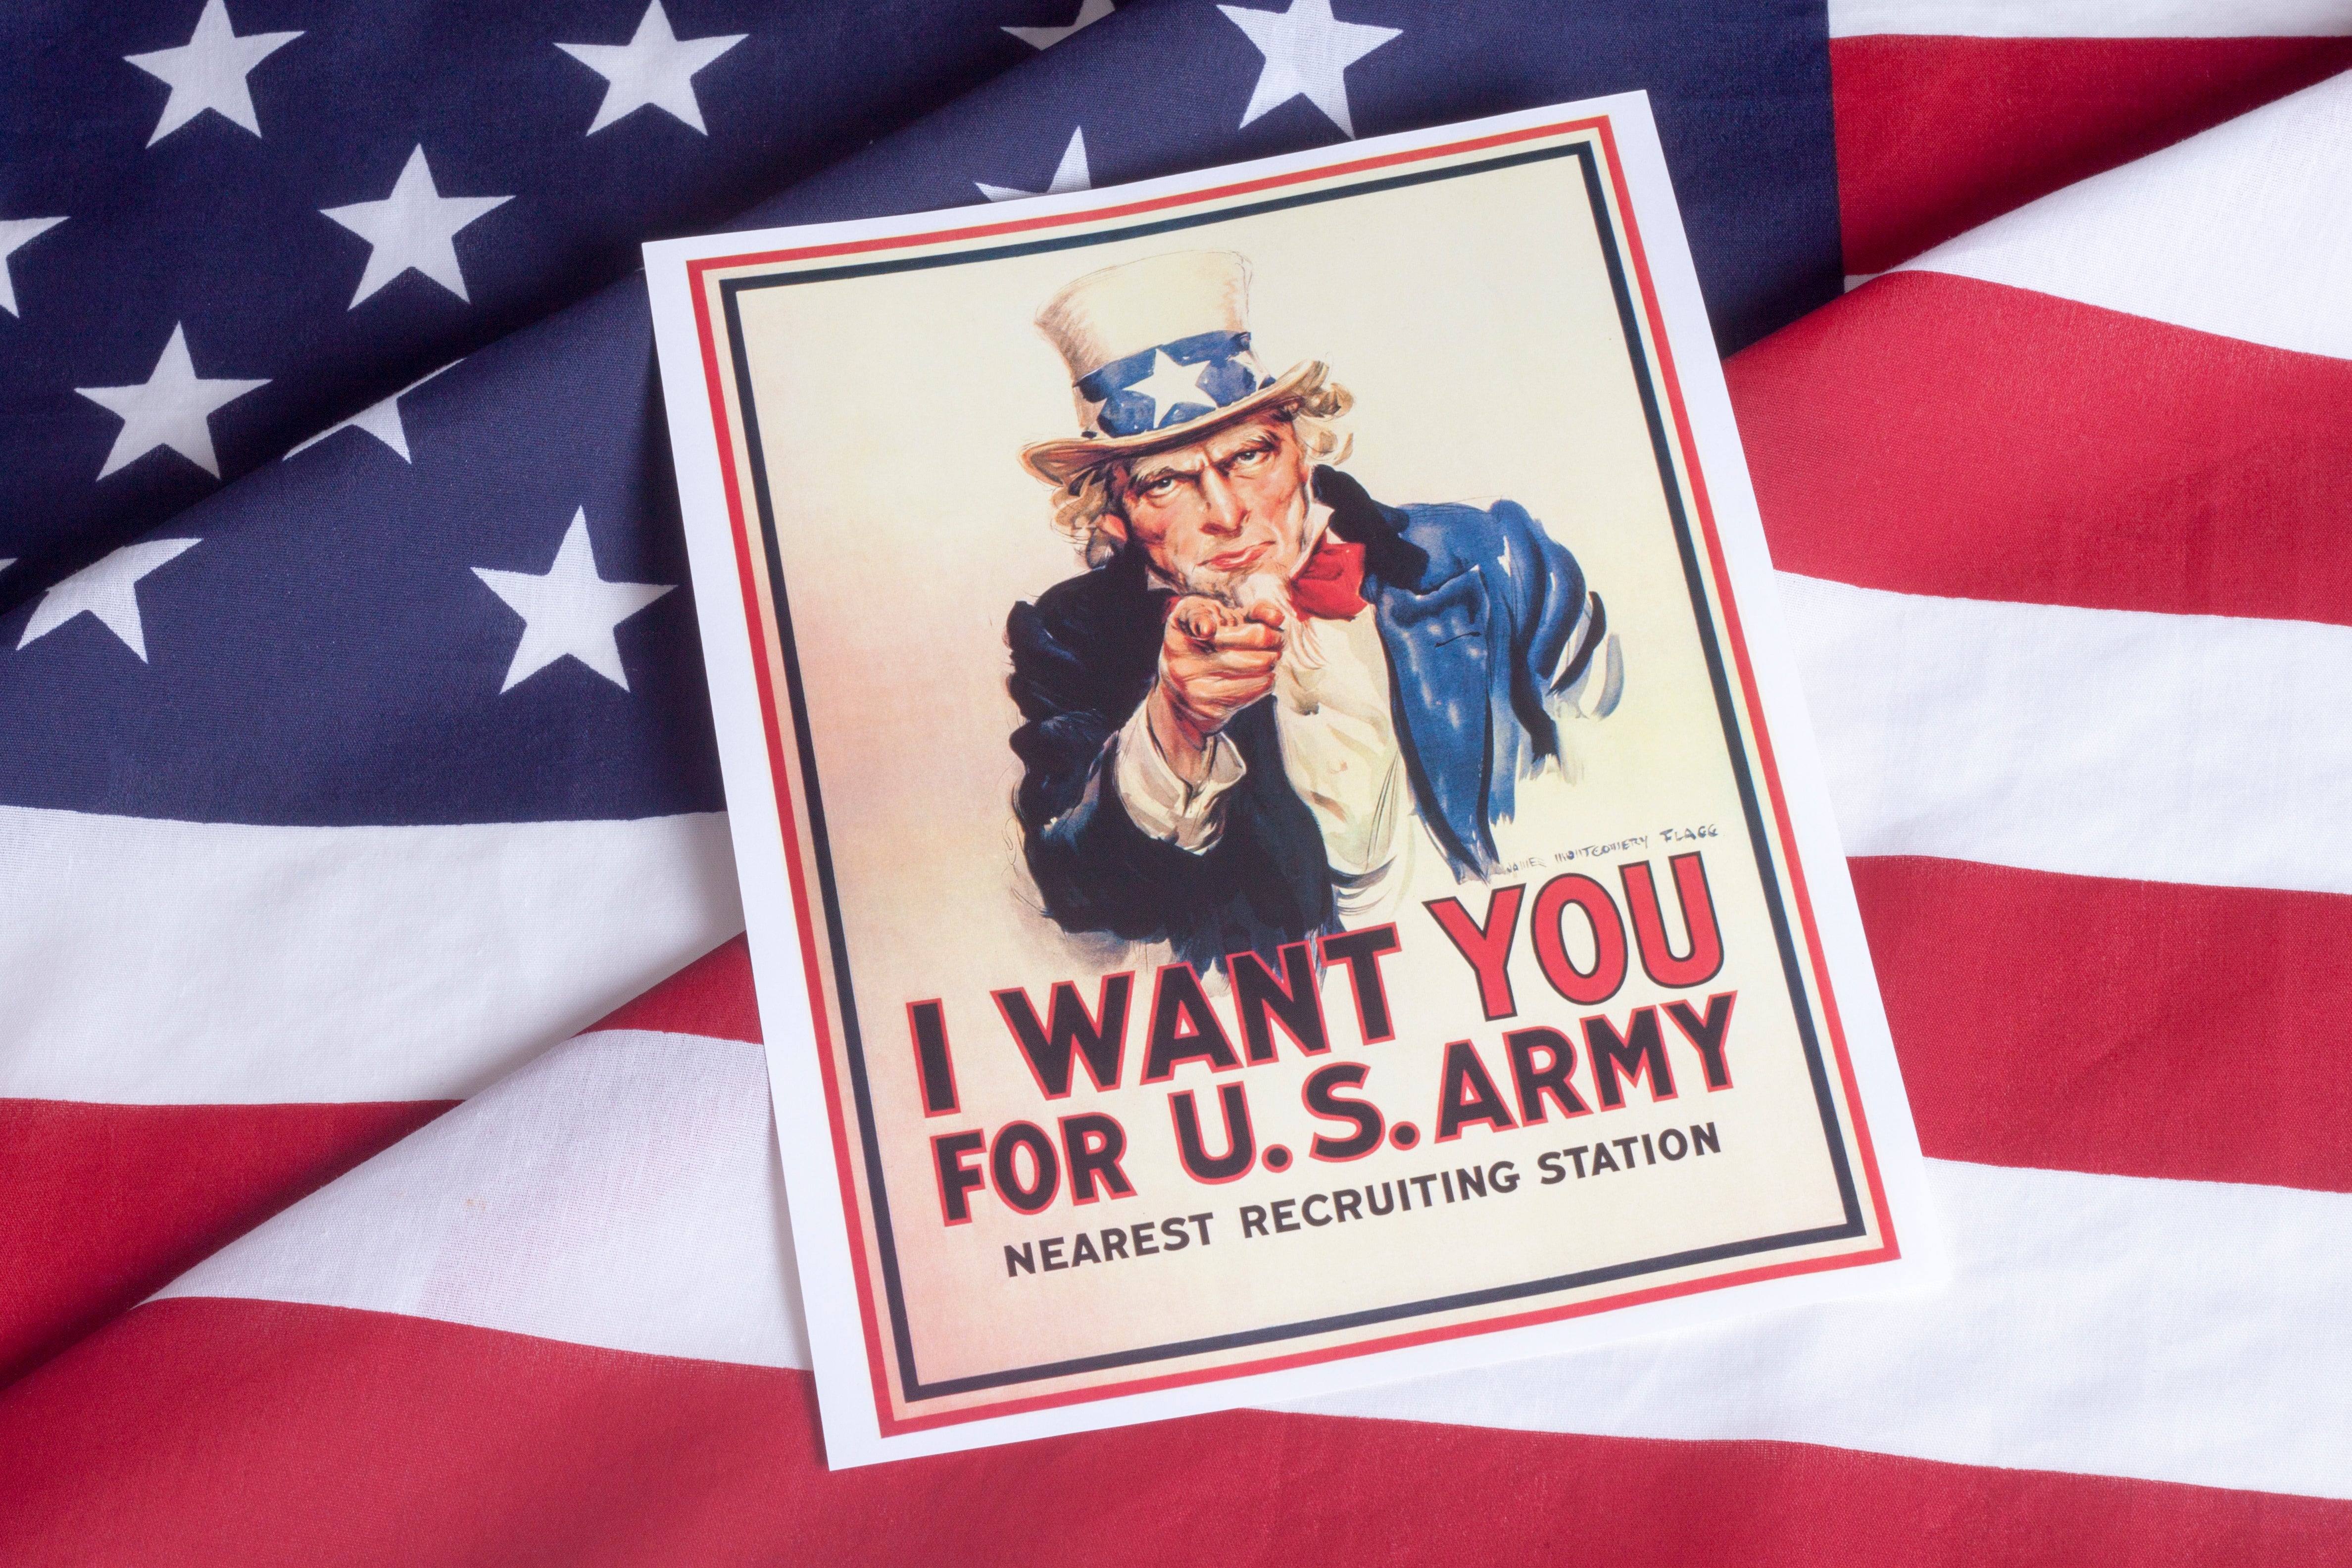 I want you for the U.S. Army nearest recruiting station Uncle Sam